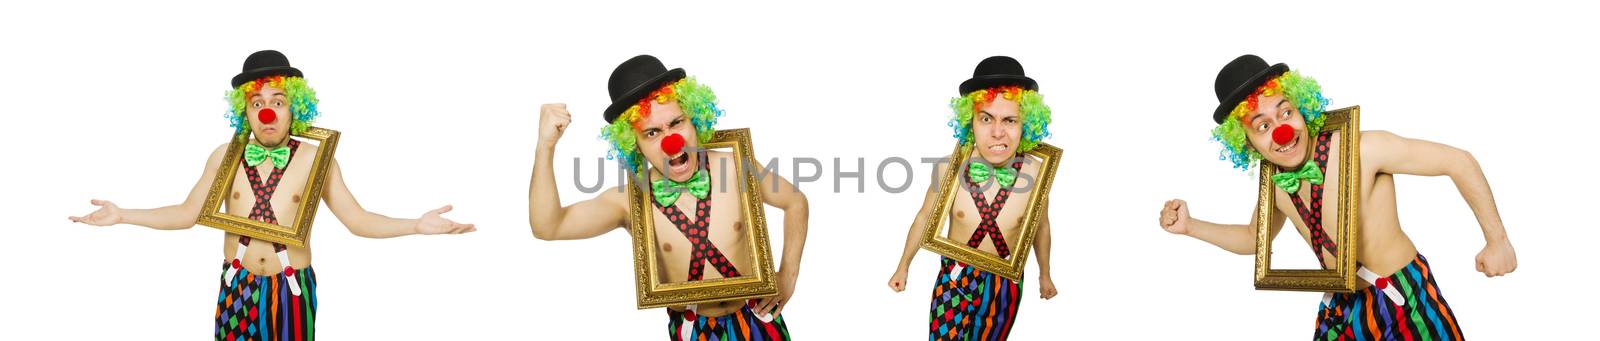 Clown with picture frame isolated on white by Elnur